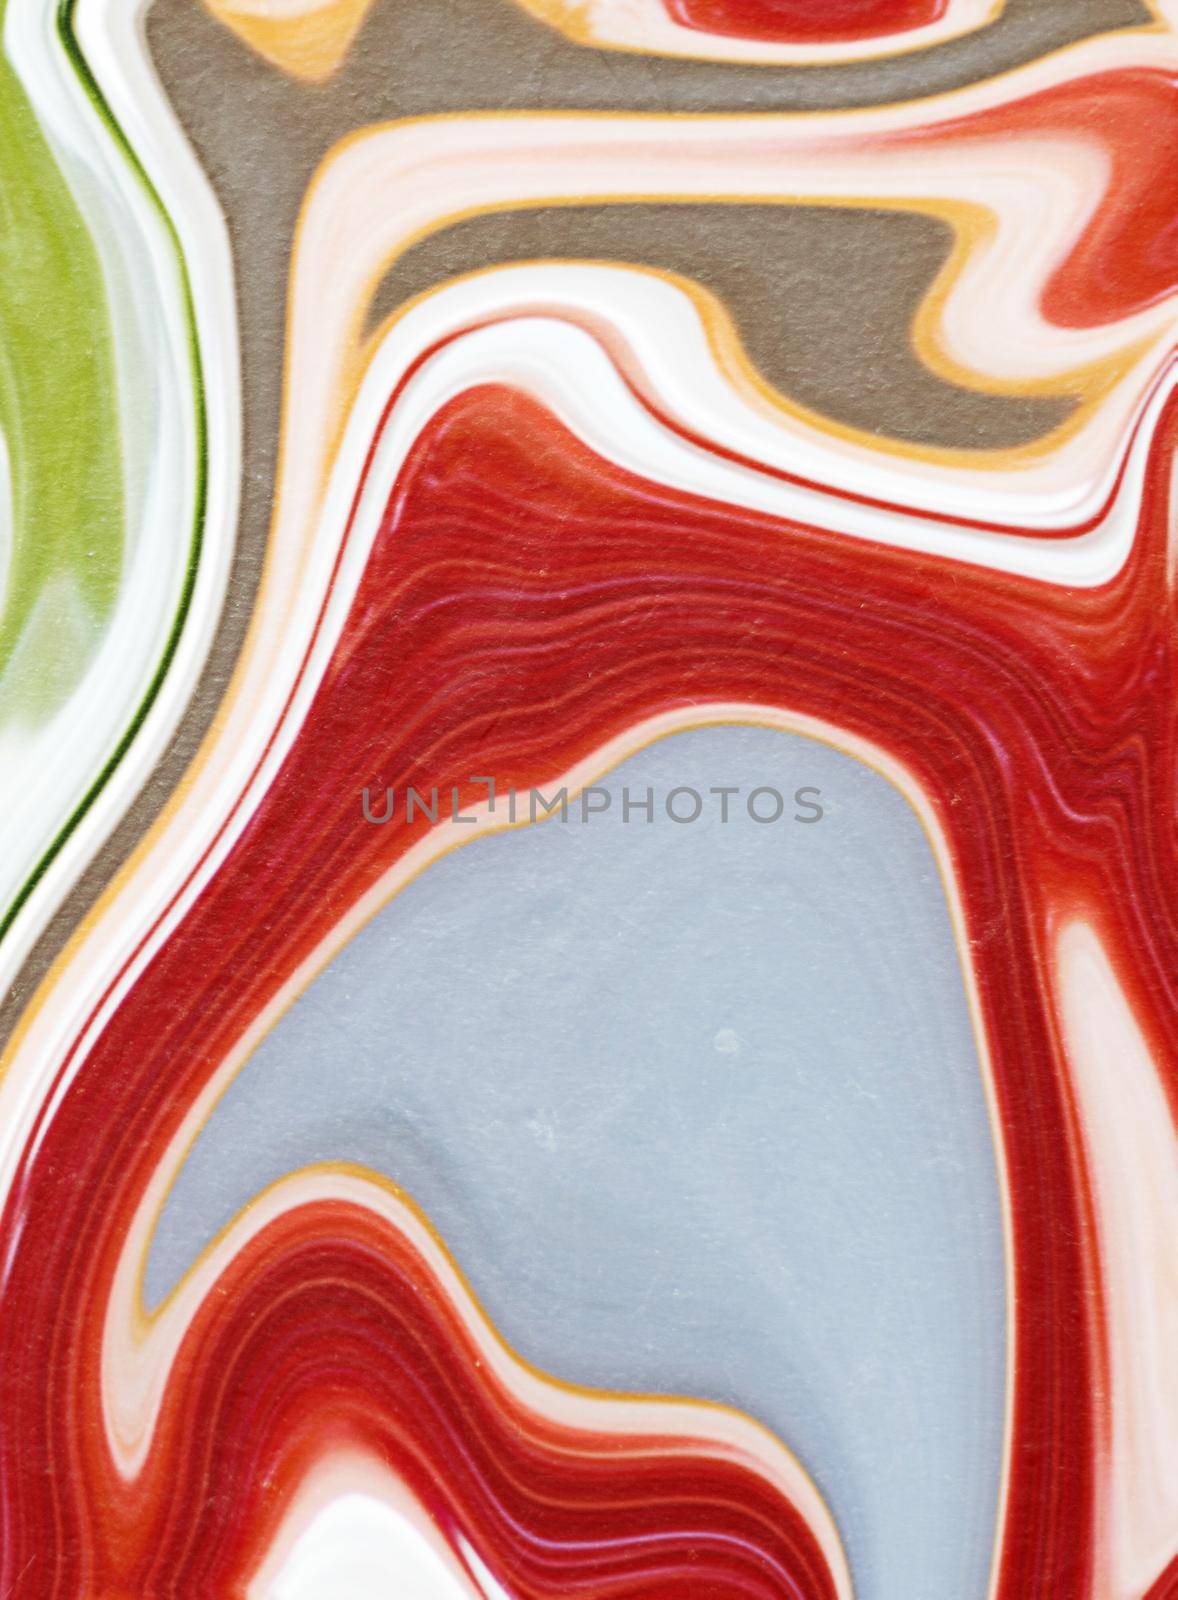 Modern marble stone surface for decoration, flatlay - luxurious background, abstract textures and stylish design concept. The art of luxury and chic